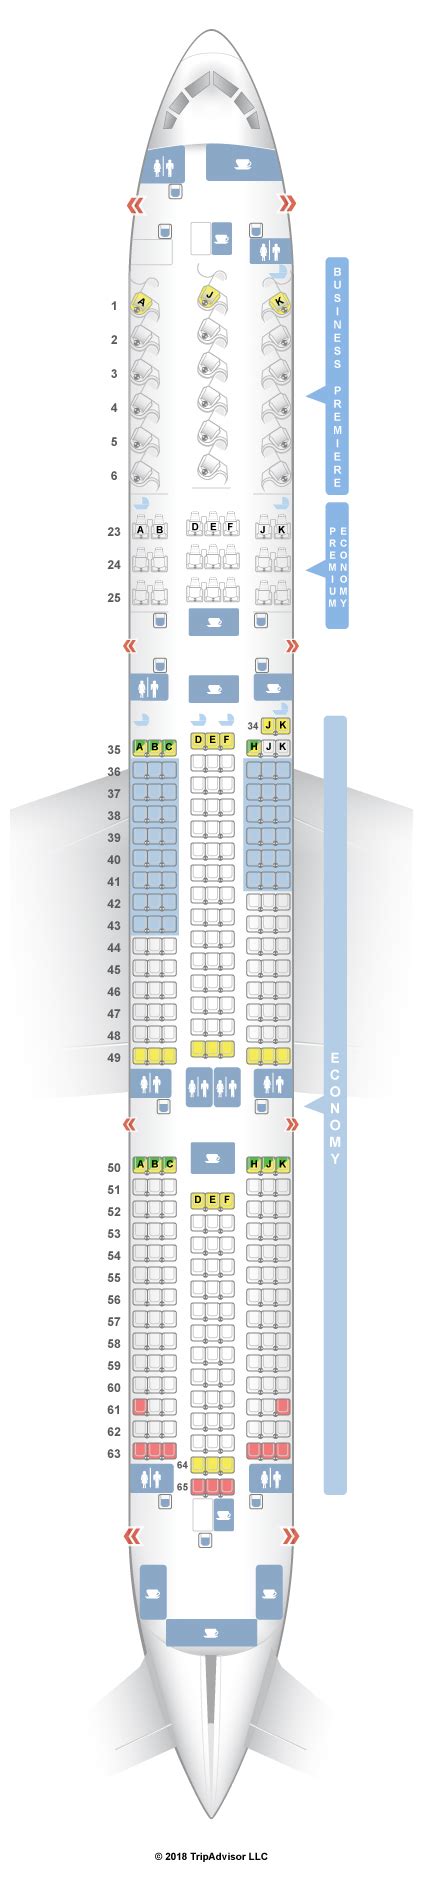 Seat Map And Seating Chart Boeing Dreamliner Gulf Air Airbus